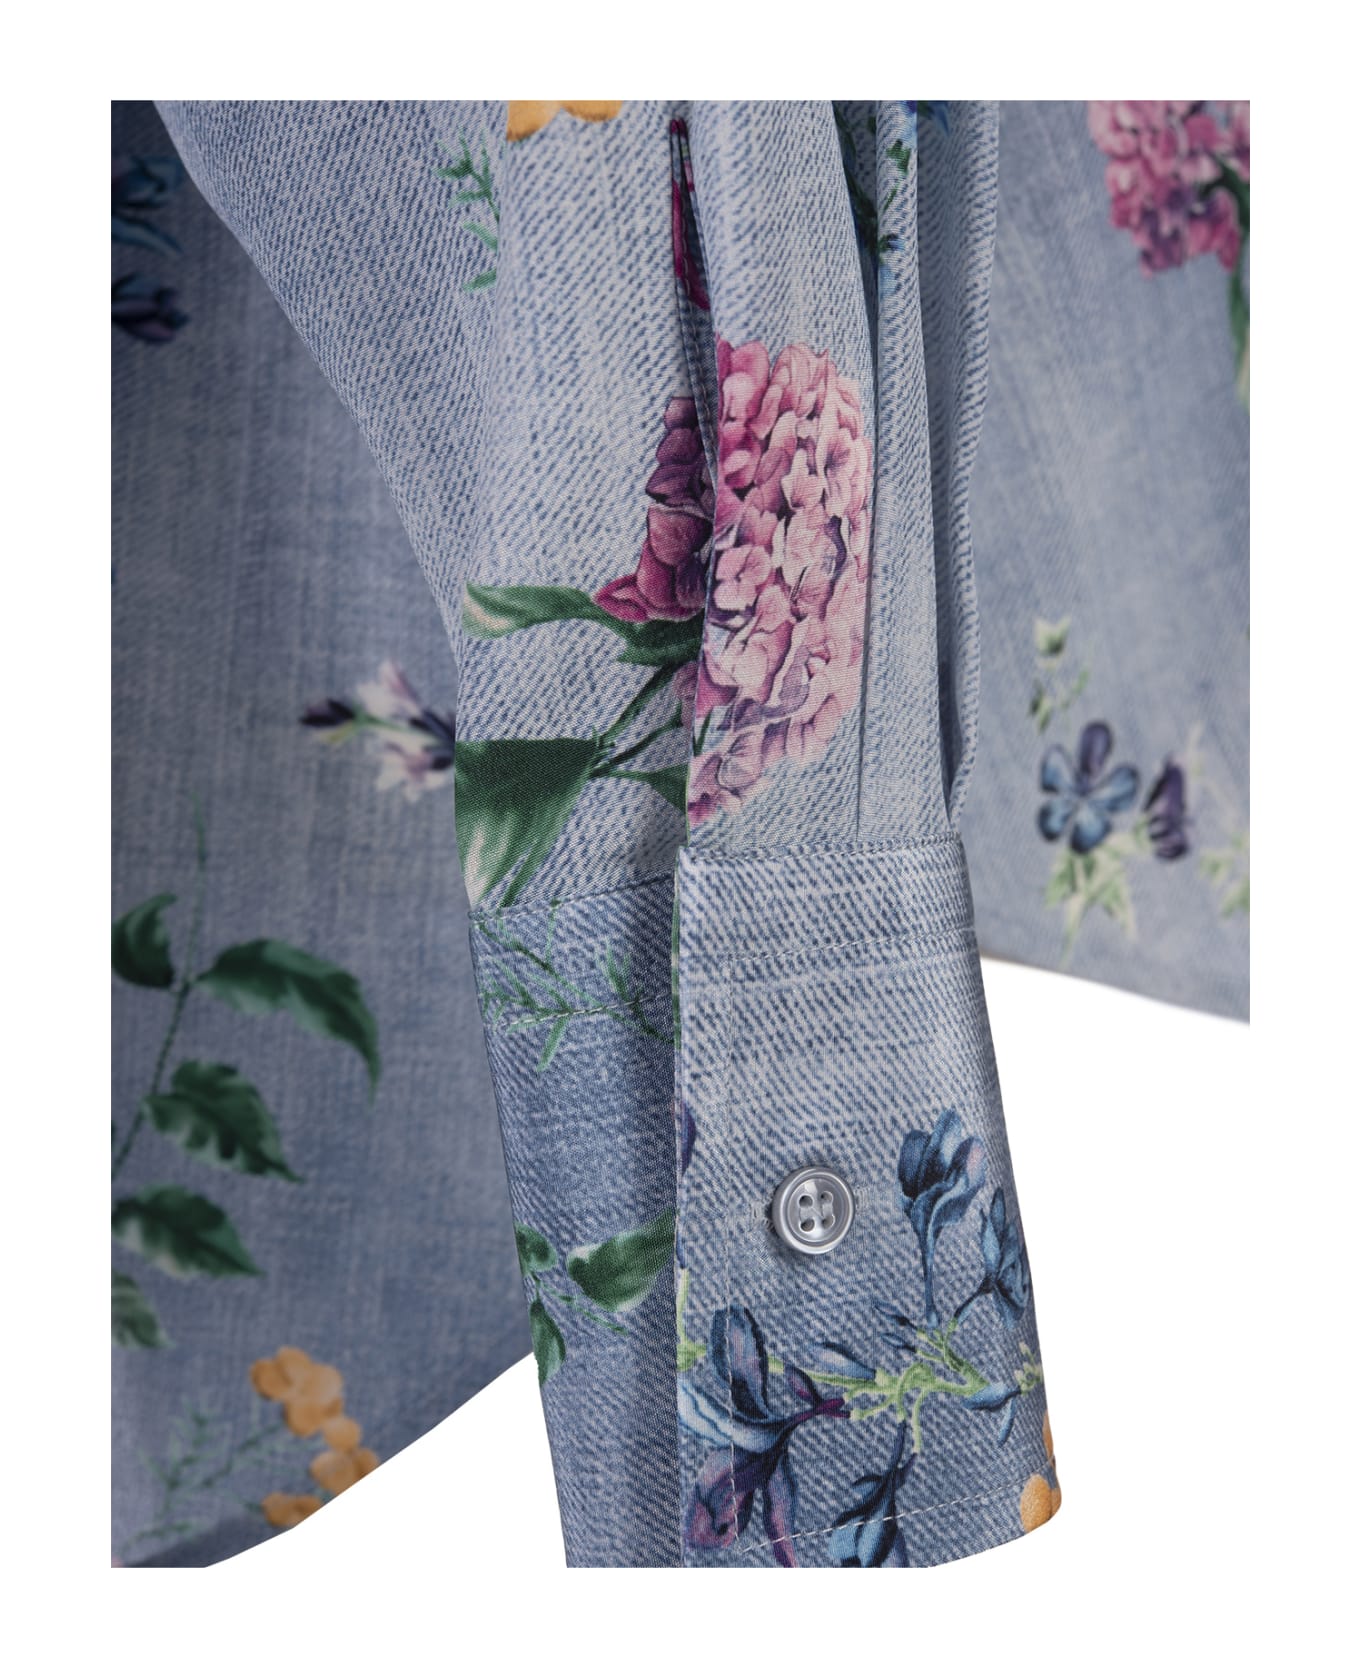 Ermanno Scervino Silk Over Shirt With Floral Print - Blue シャツ